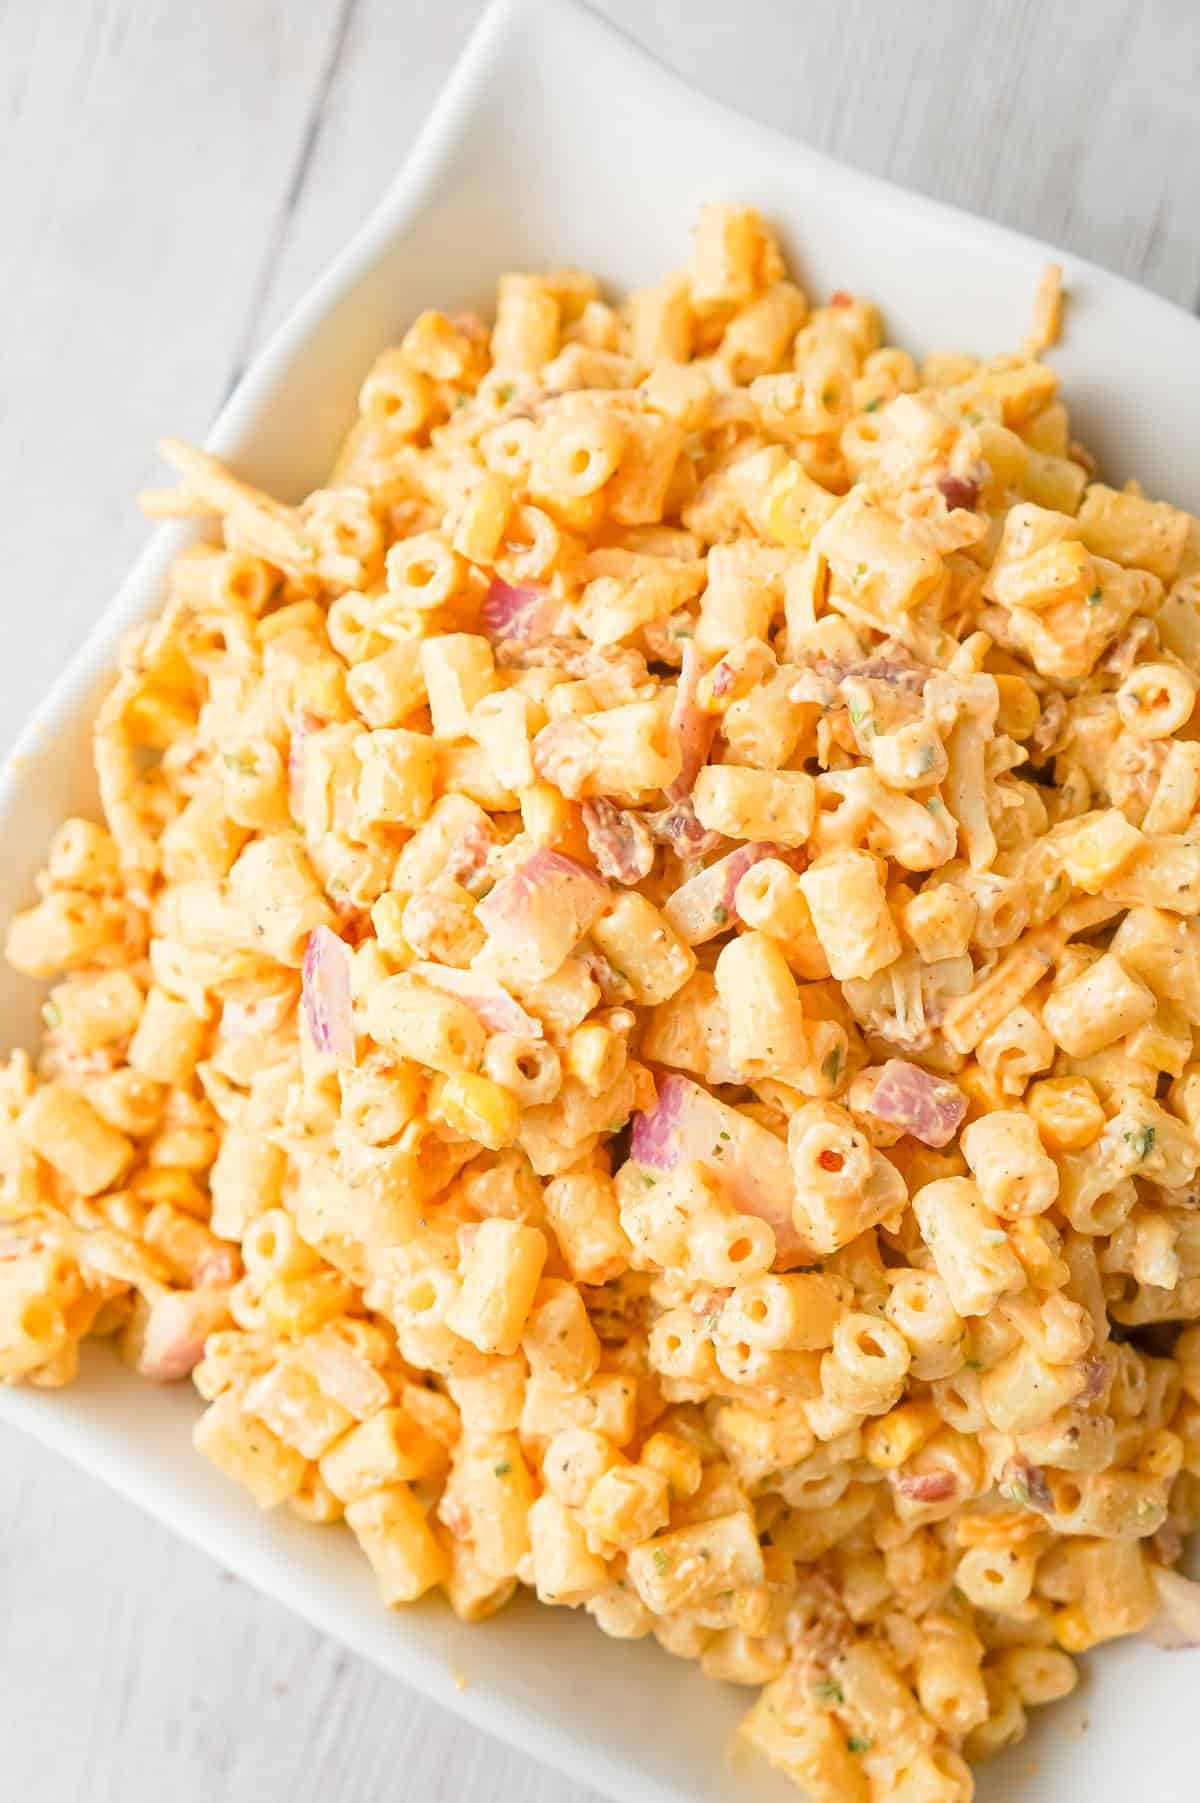 Cajun Macaroni Salad is a cold side dish recipe loaded with canned corn, crumbled bacon, diced red onions, shredded cheese and tossed in mayo and Cajun seasoning.